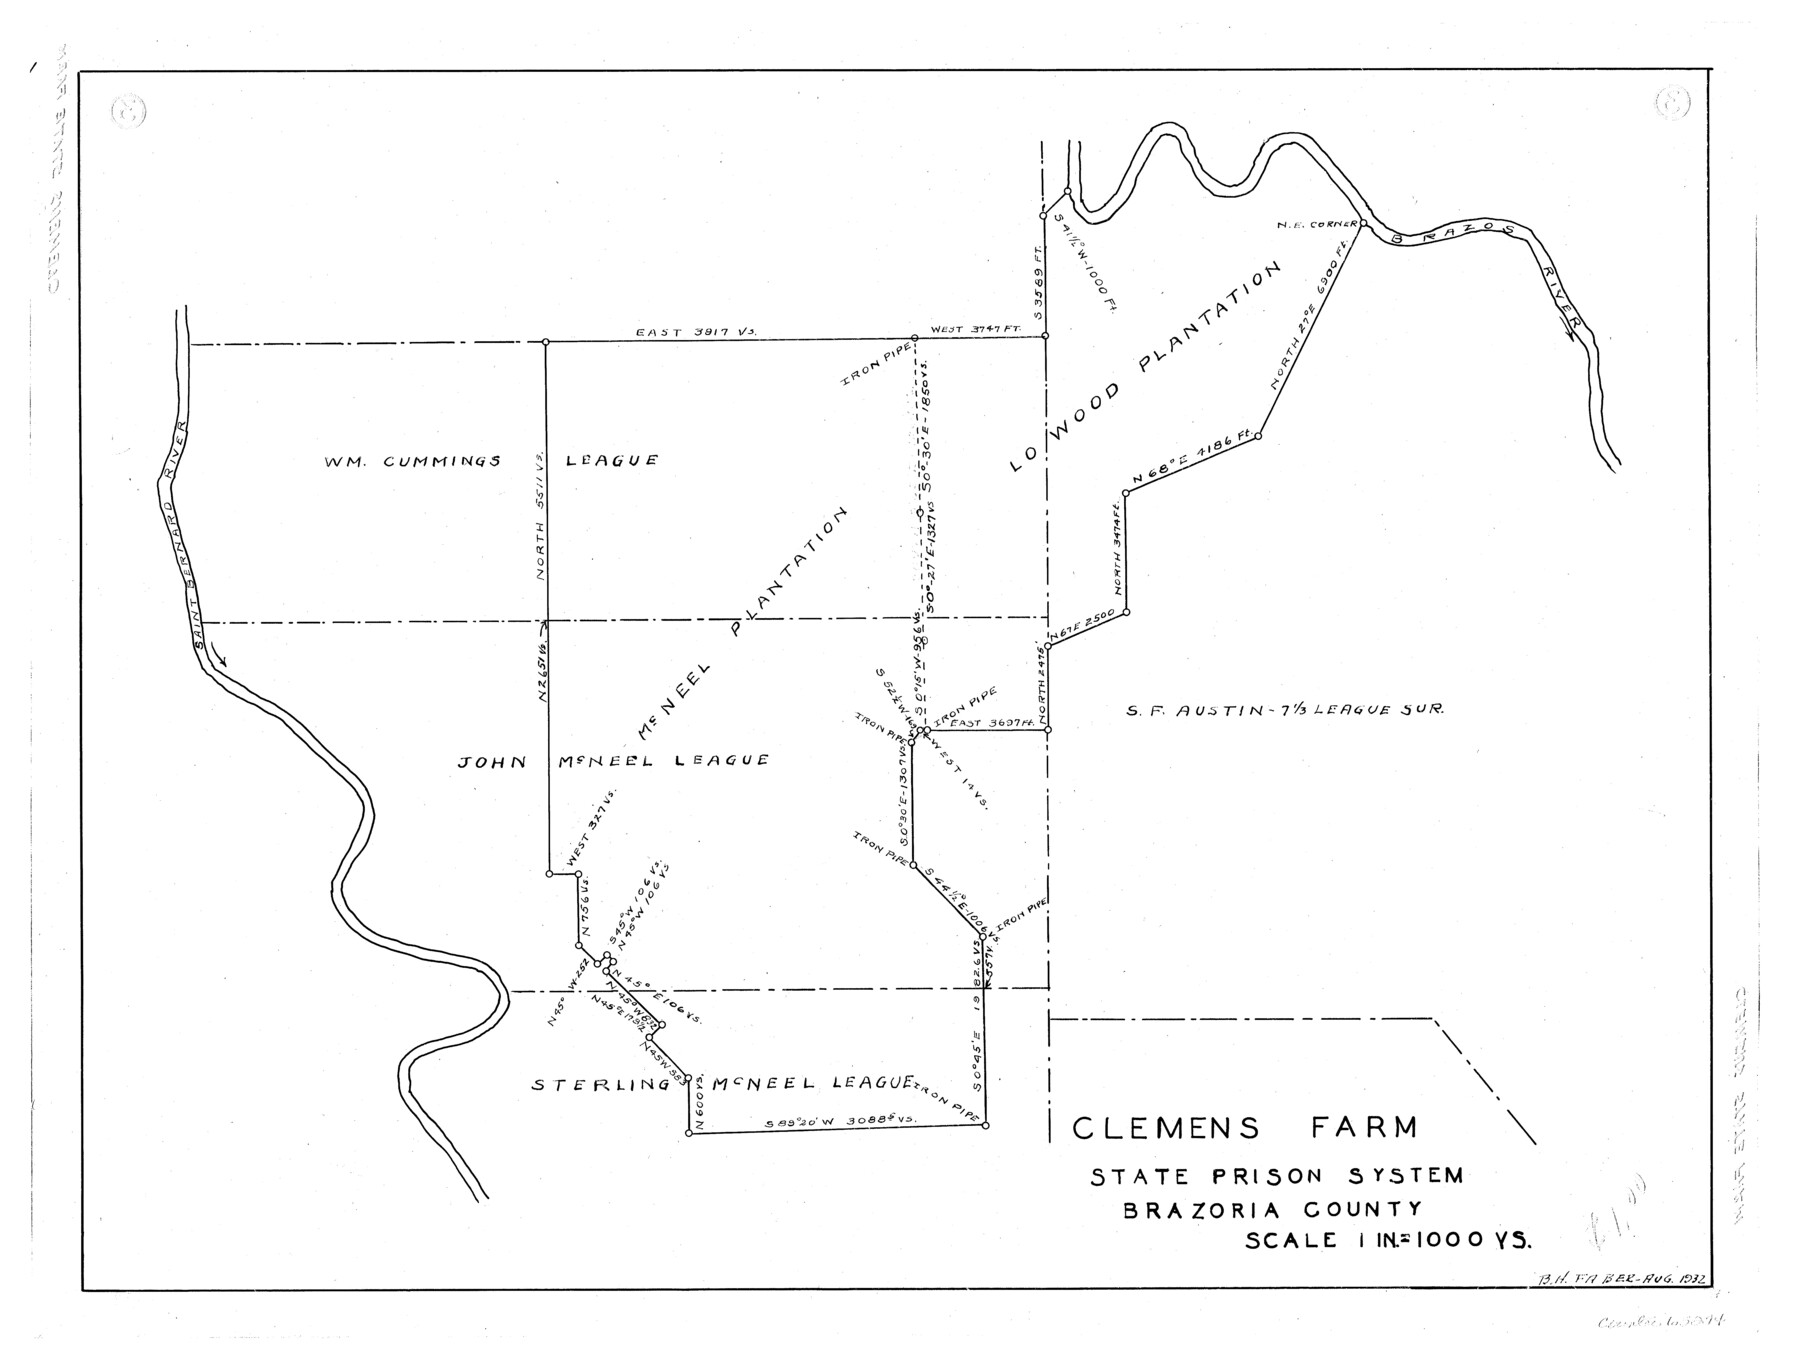 65274, Clemens Farm, State Prison System, Brazoria County, General Map Collection